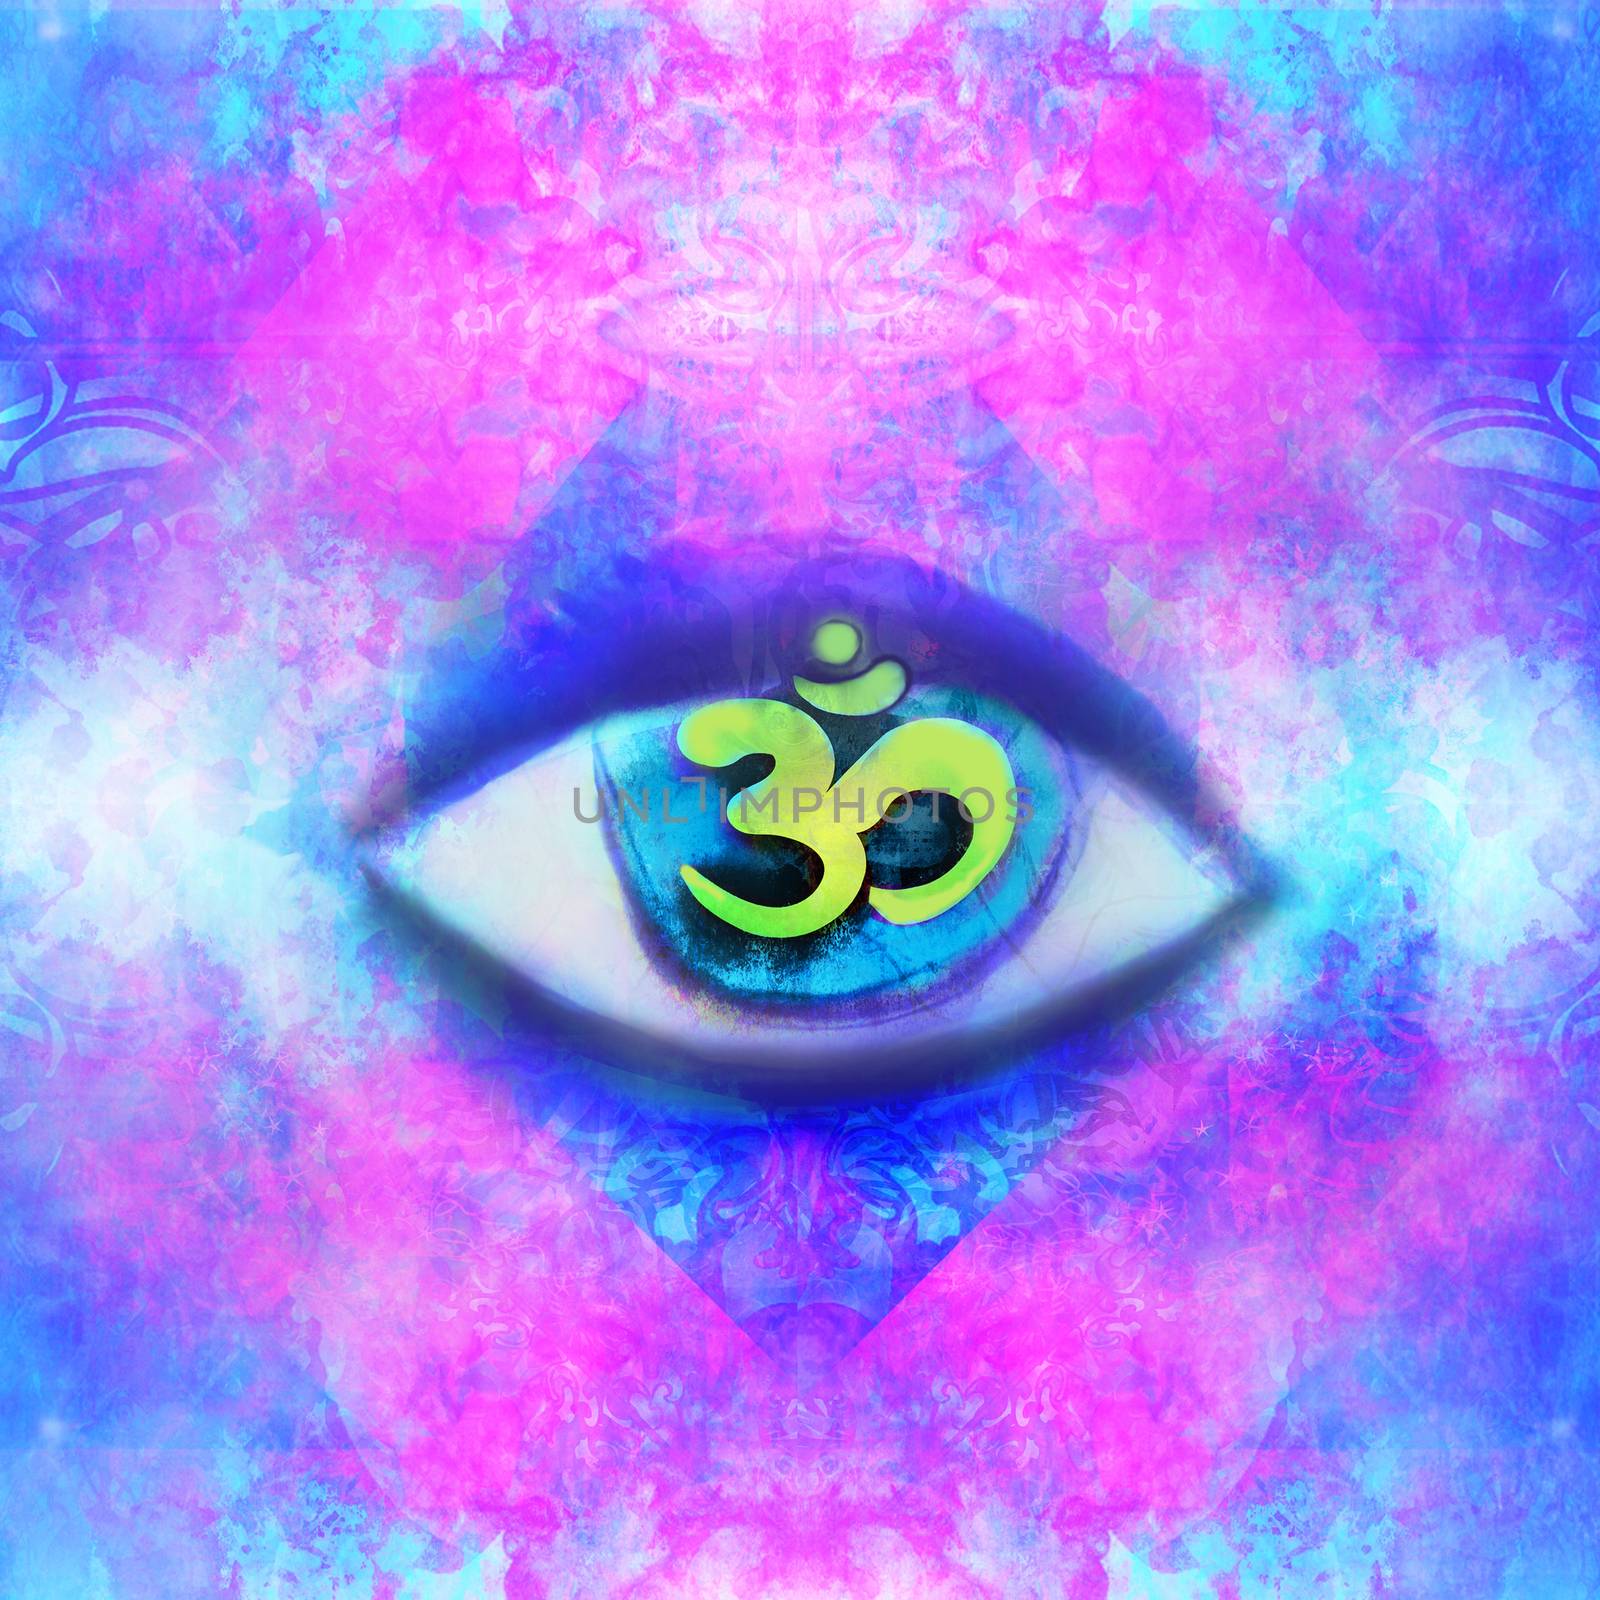 Illustration of a third eye mystical sign by JackyBrown